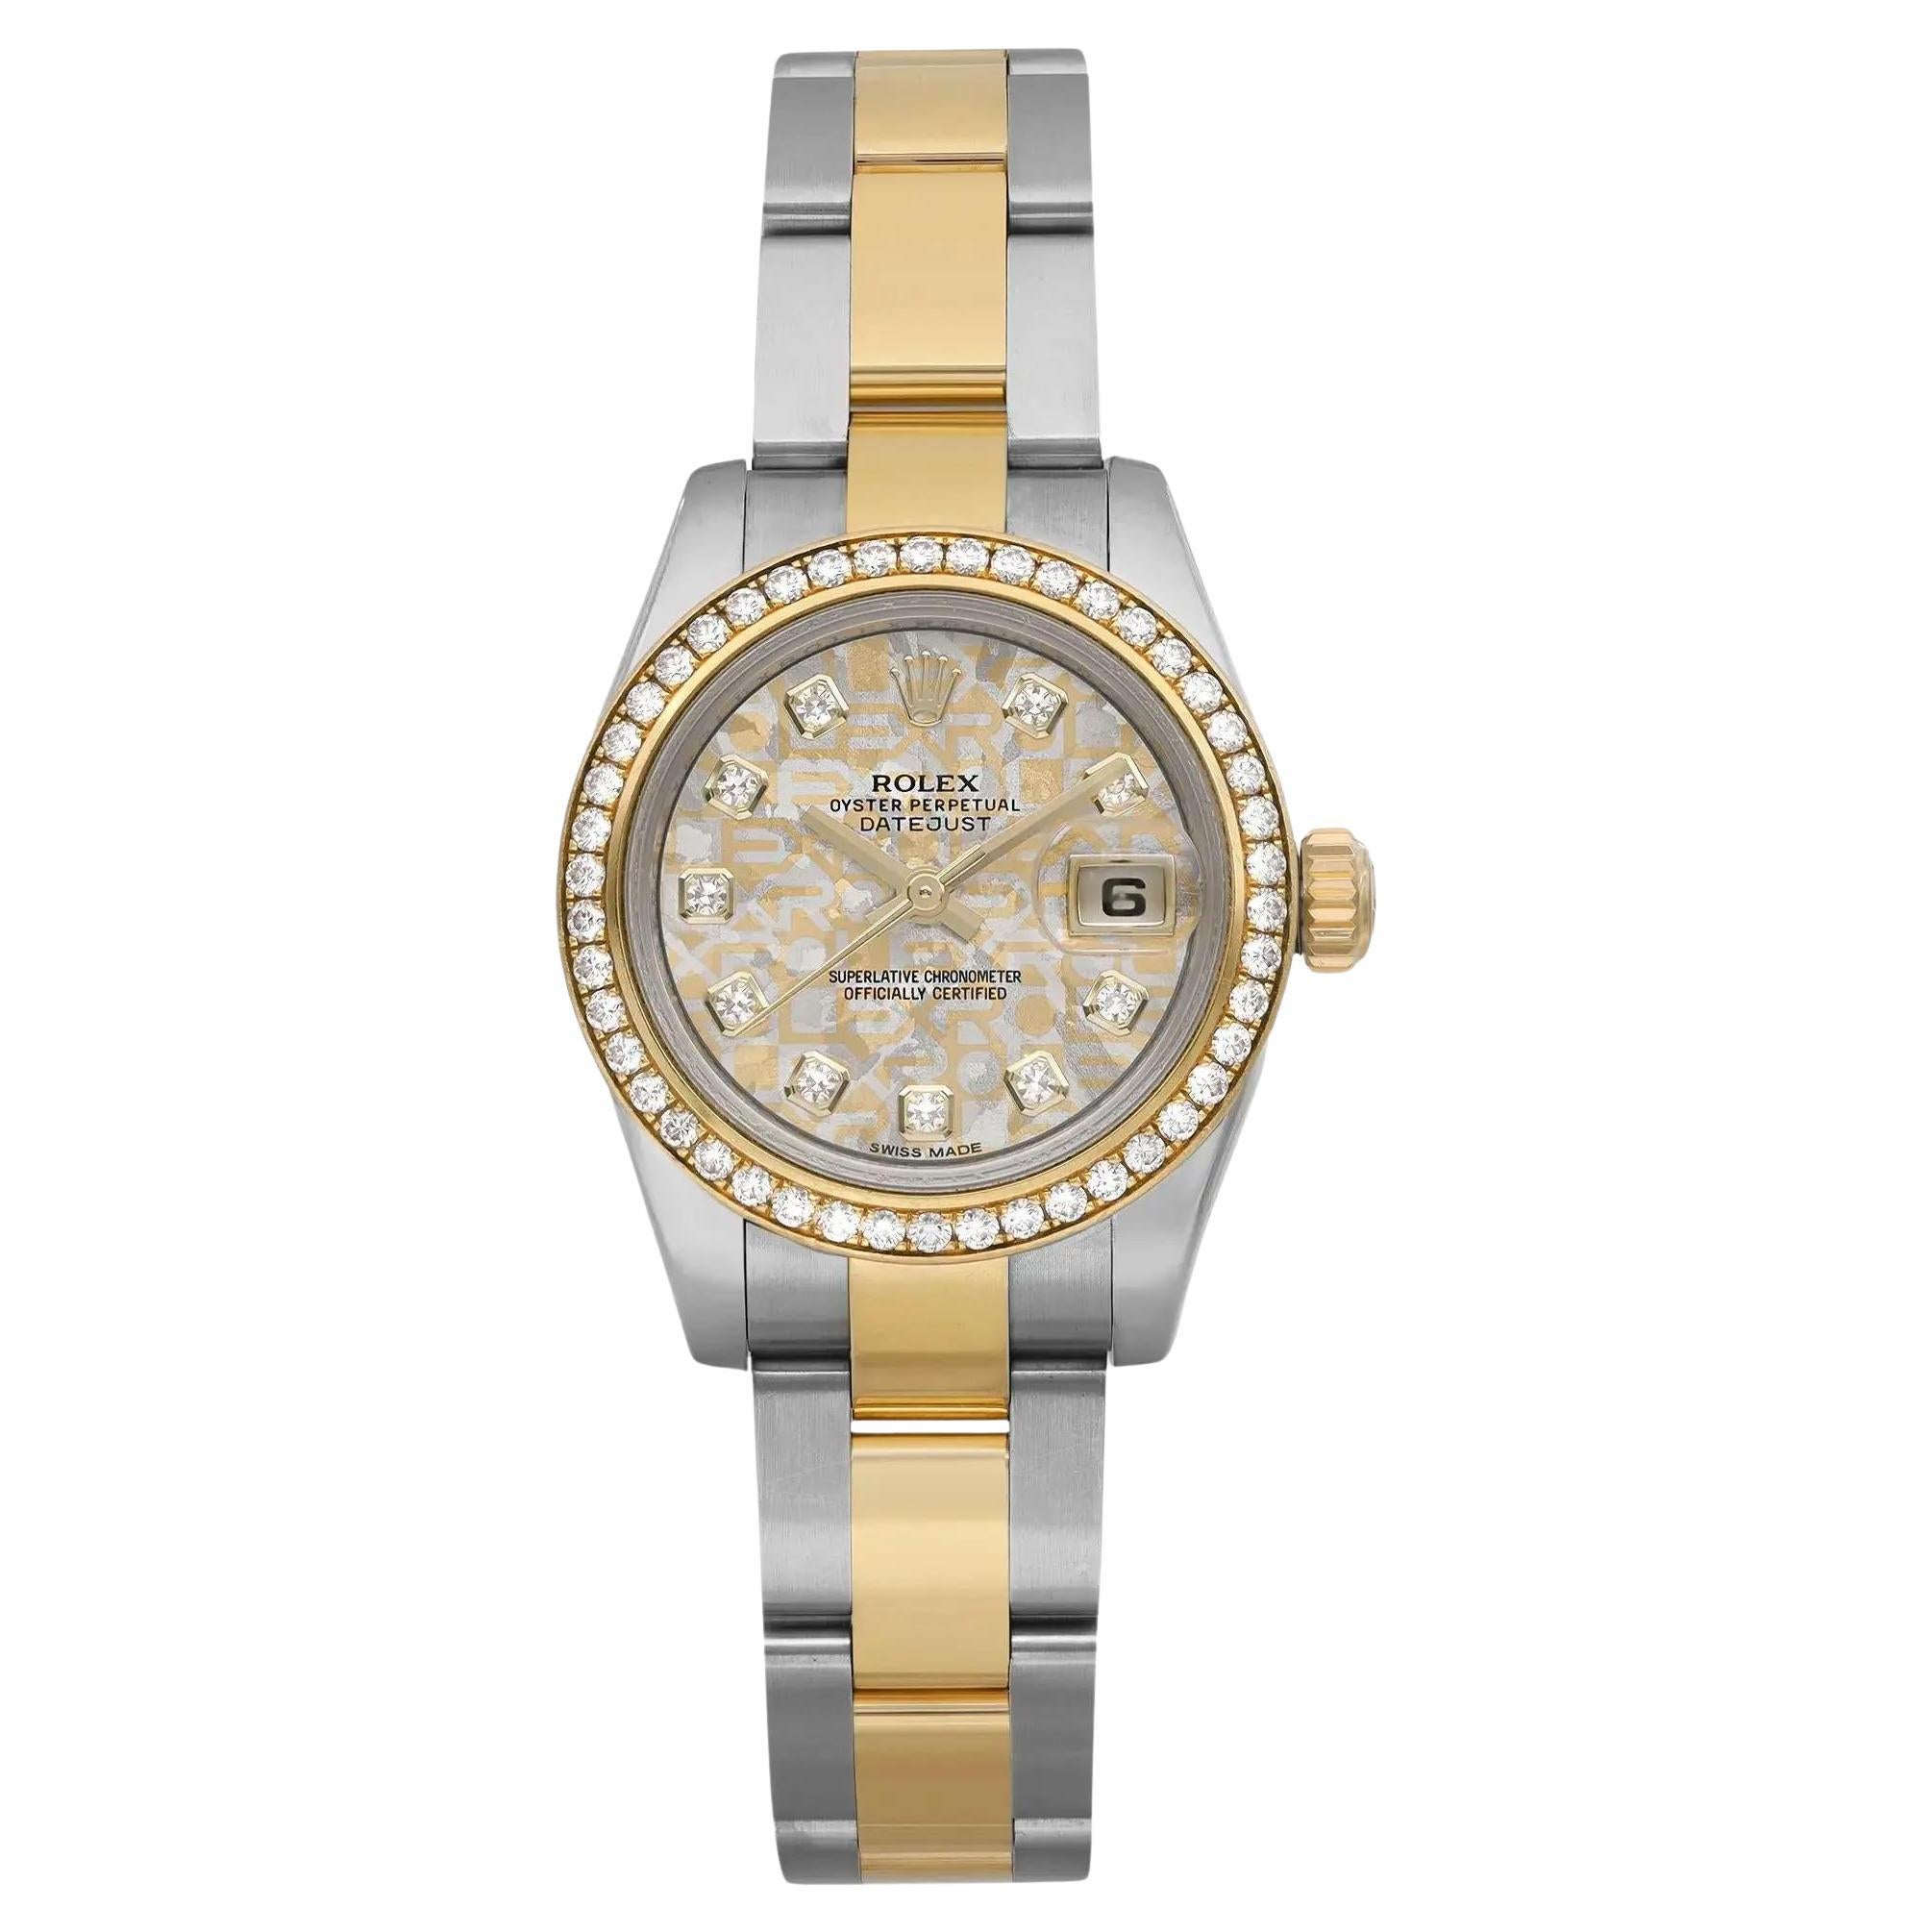 Rare Rolex Lady-Datejust 26 18k Gold Steel Crystal Flake Diamond Dial 179383 For Sale